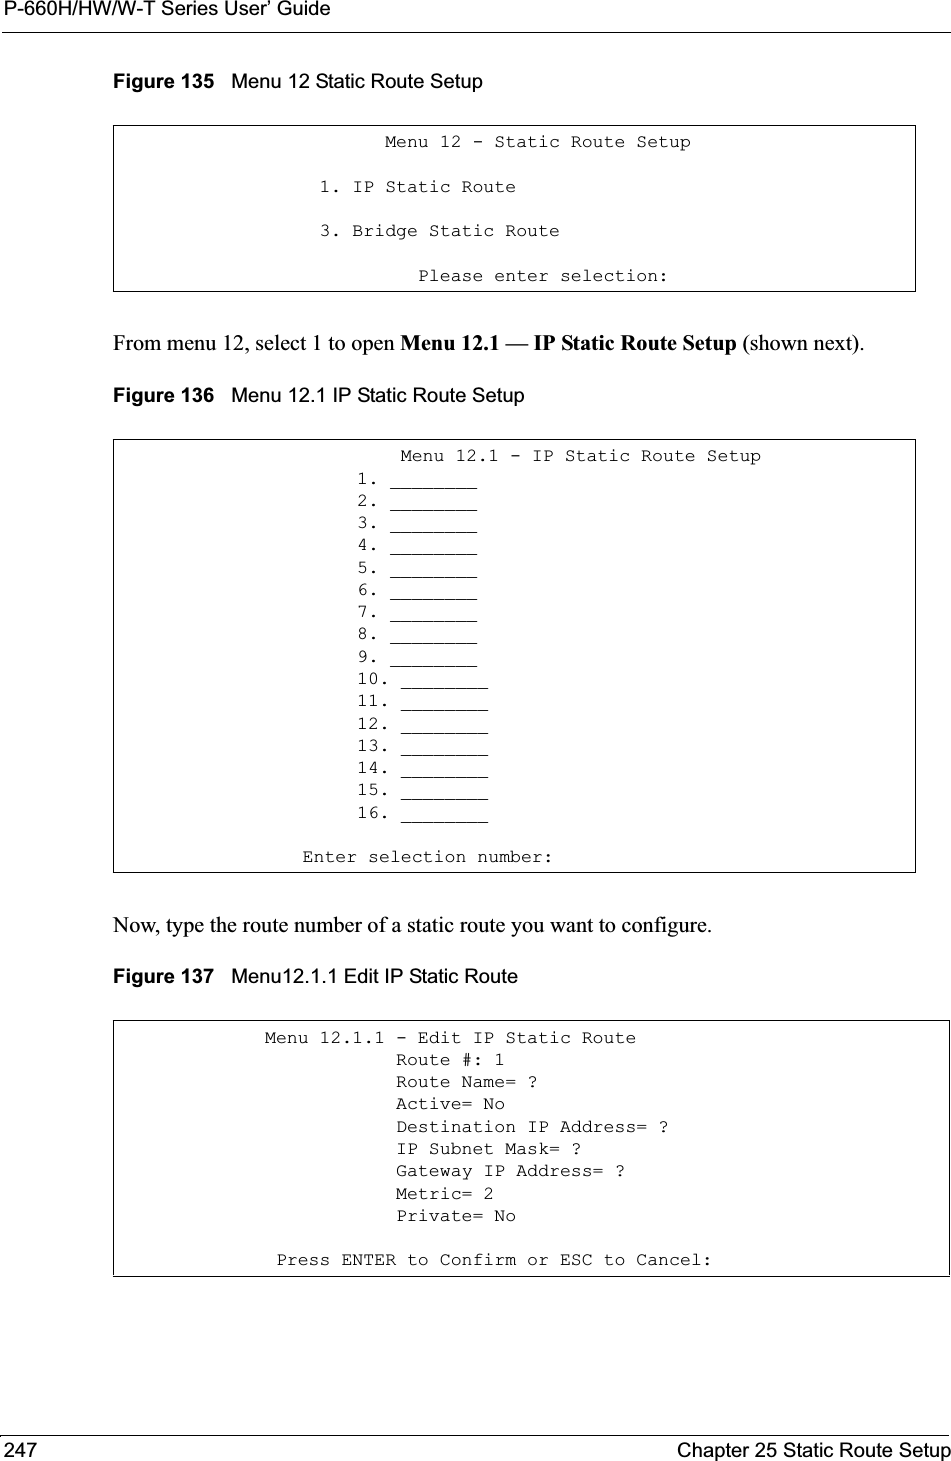 P-660H/HW/W-T Series User’ Guide247 Chapter 25 Static Route SetupFigure 135   Menu 12 Static Route SetupFrom menu 12, select 1 to open Menu 12.1 — IP Static Route Setup (shown next).Figure 136   Menu 12.1 IP Static Route SetupNow, type the route number of a static route you want to configure.Figure 137   Menu12.1.1 Edit IP Static Route           Menu 12 - Static Route Setup     1. IP Static Route     3. Bridge Static Route              Please enter selection:                  Menu 12.1 - IP Static Route Setup              1. ________              2. ________              3. ________              4. ________              5. ________              6. ________              7. ________              8. ________              9. ________              10. ________              11. ________              12. ________              13. ________              14. ________              15. ________              16. ________         Enter selection number:Menu 12.1.1 - Edit IP Static Route            Route #: 1            Route Name= ?            Active= No            Destination IP Address= ?            IP Subnet Mask= ?            Gateway IP Address= ?            Metric= 2            Private= No Press ENTER to Confirm or ESC to Cancel: